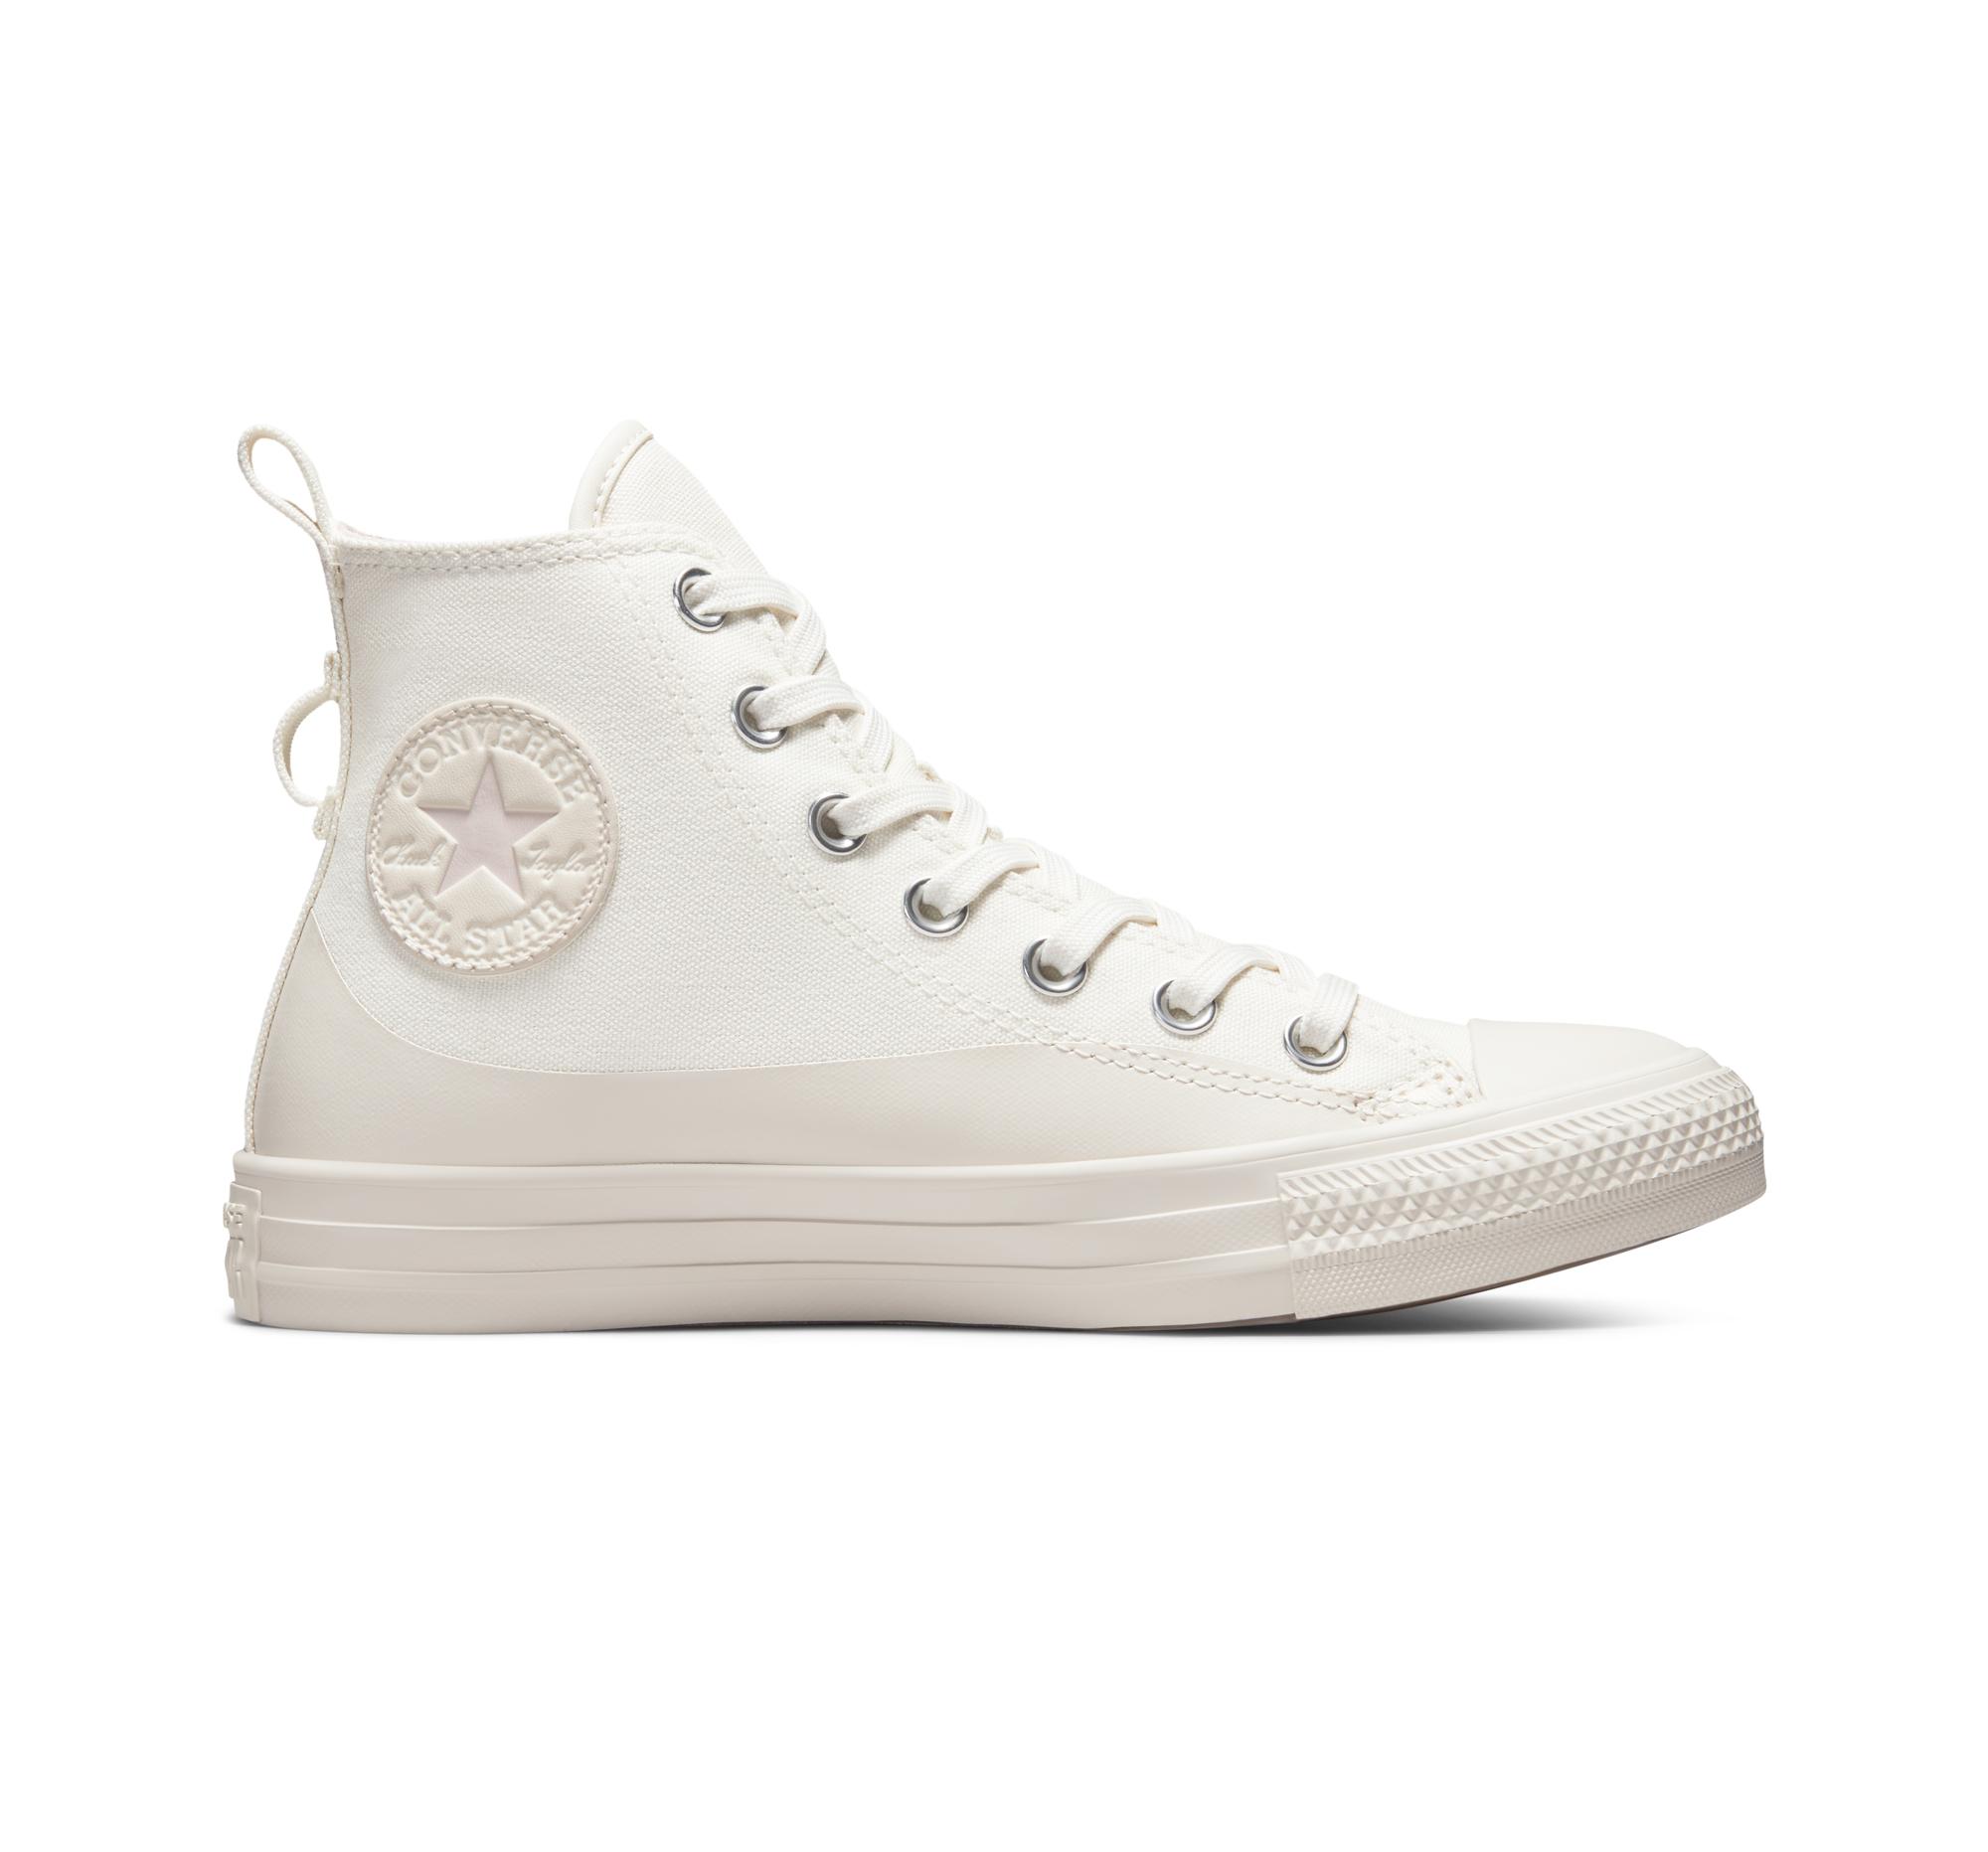 Converse Chuck Taylor All Star Water-repellent Canvas in White | Lyst